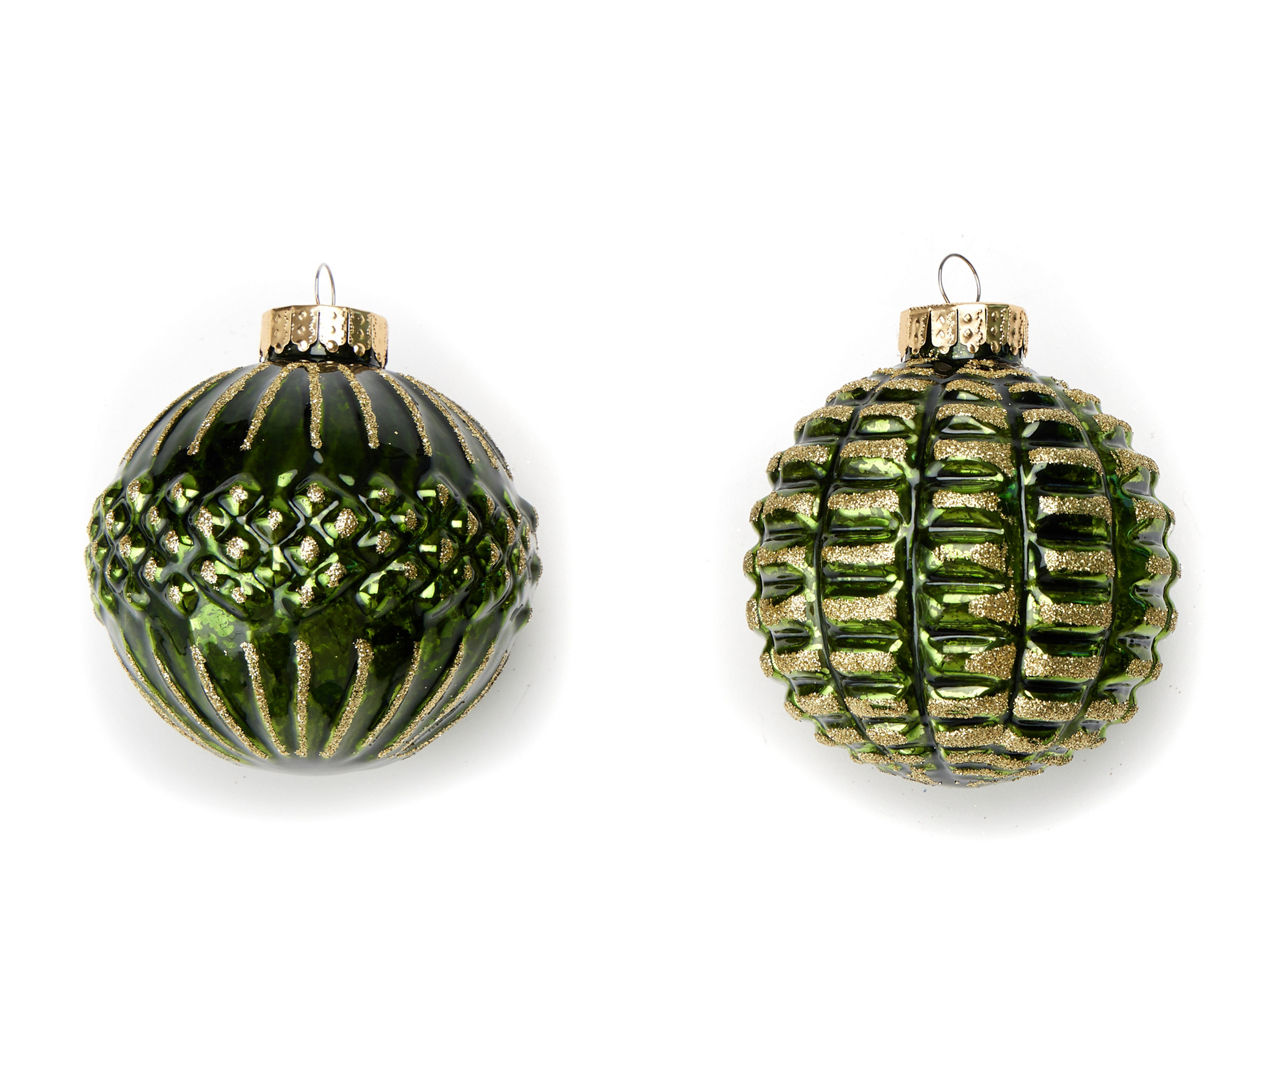 Green & Gold Embossed Glass Ornaments, 6-Pack